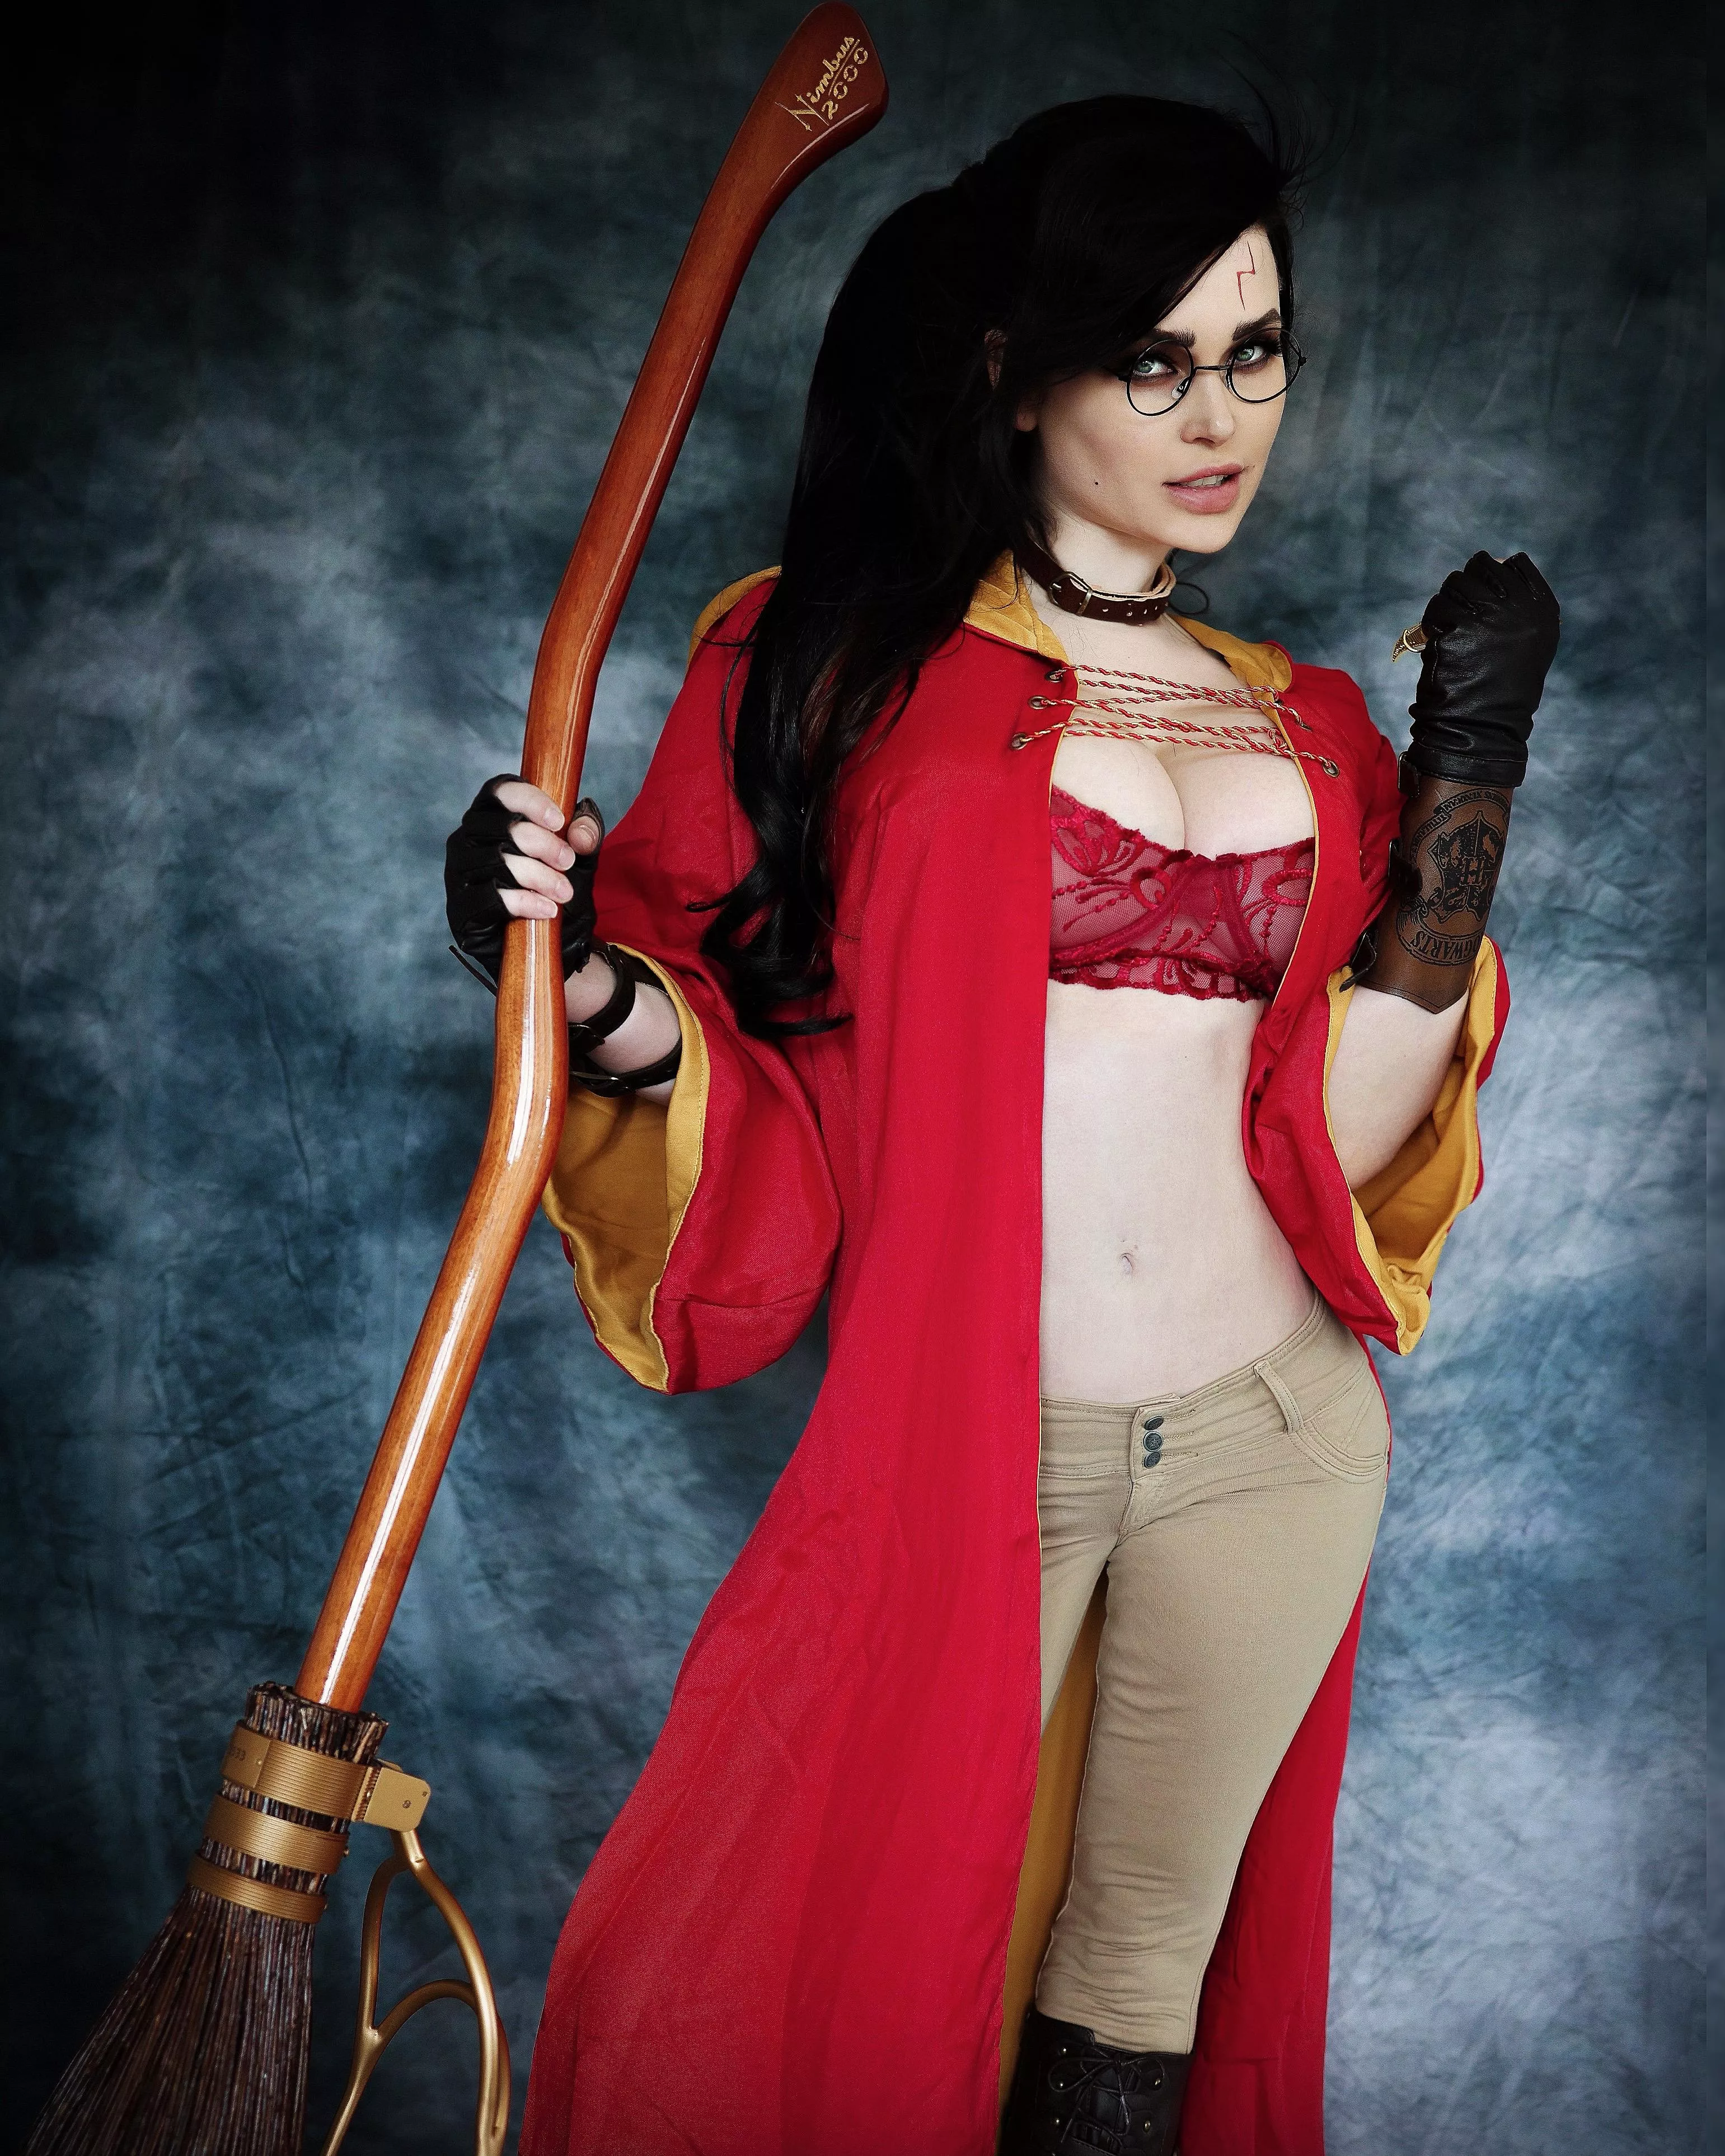 Nude harry potter cosplay